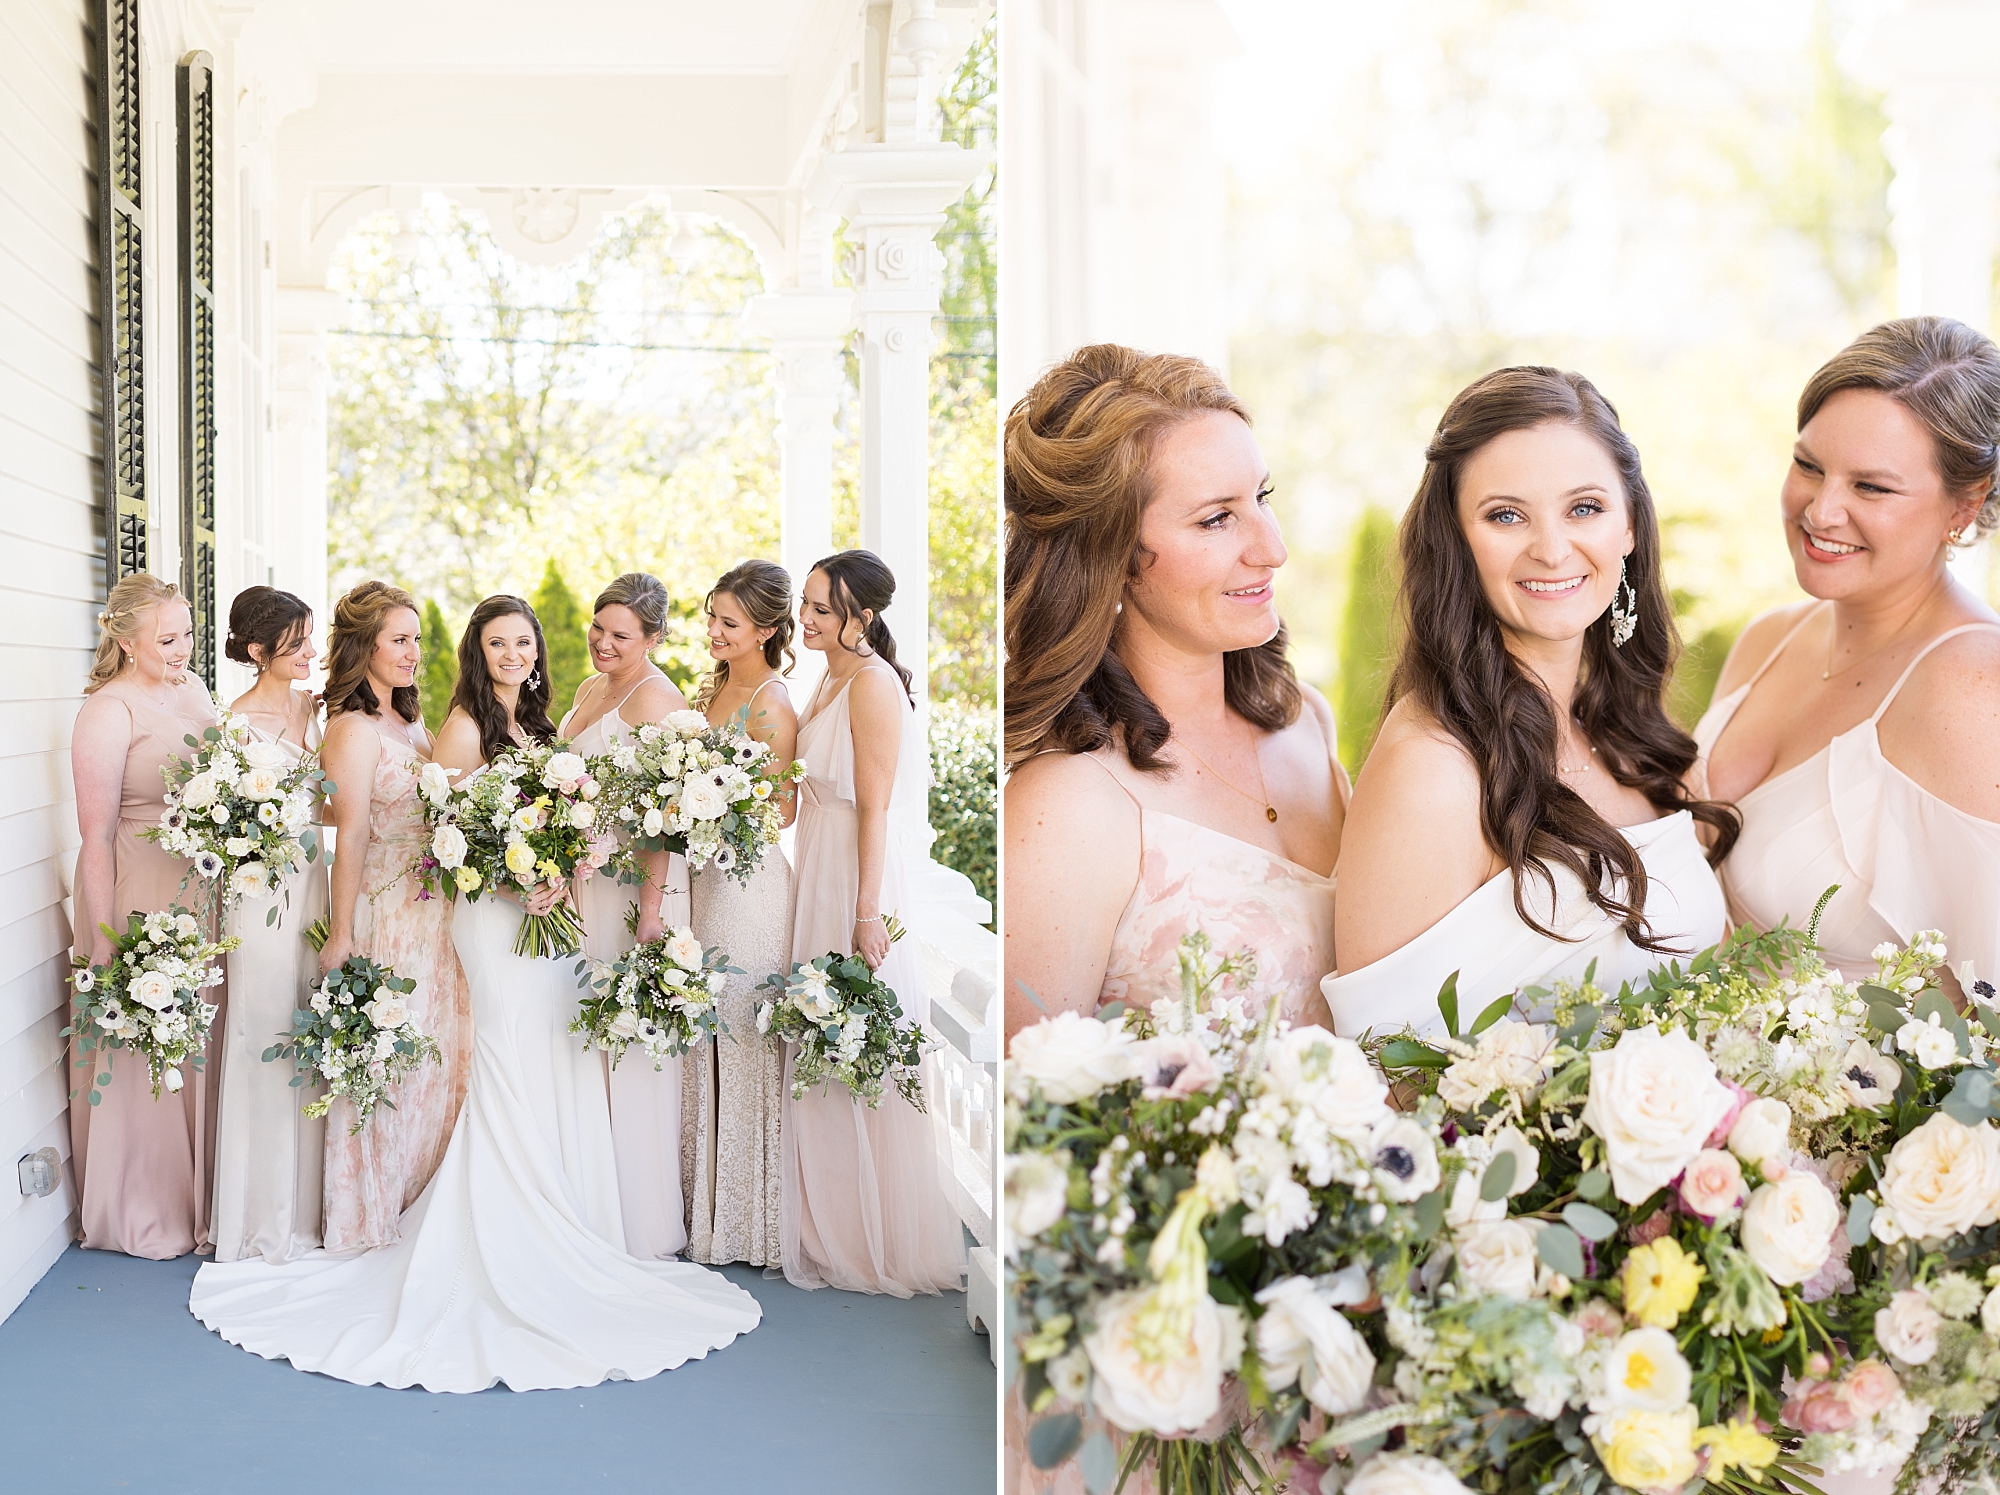 Bridesmaid photos with pink dresses at a classic southern home  | Merrimon Wynne Wedding | Sarah Hinckley Photography | Raleigh NC Wedding Photographer